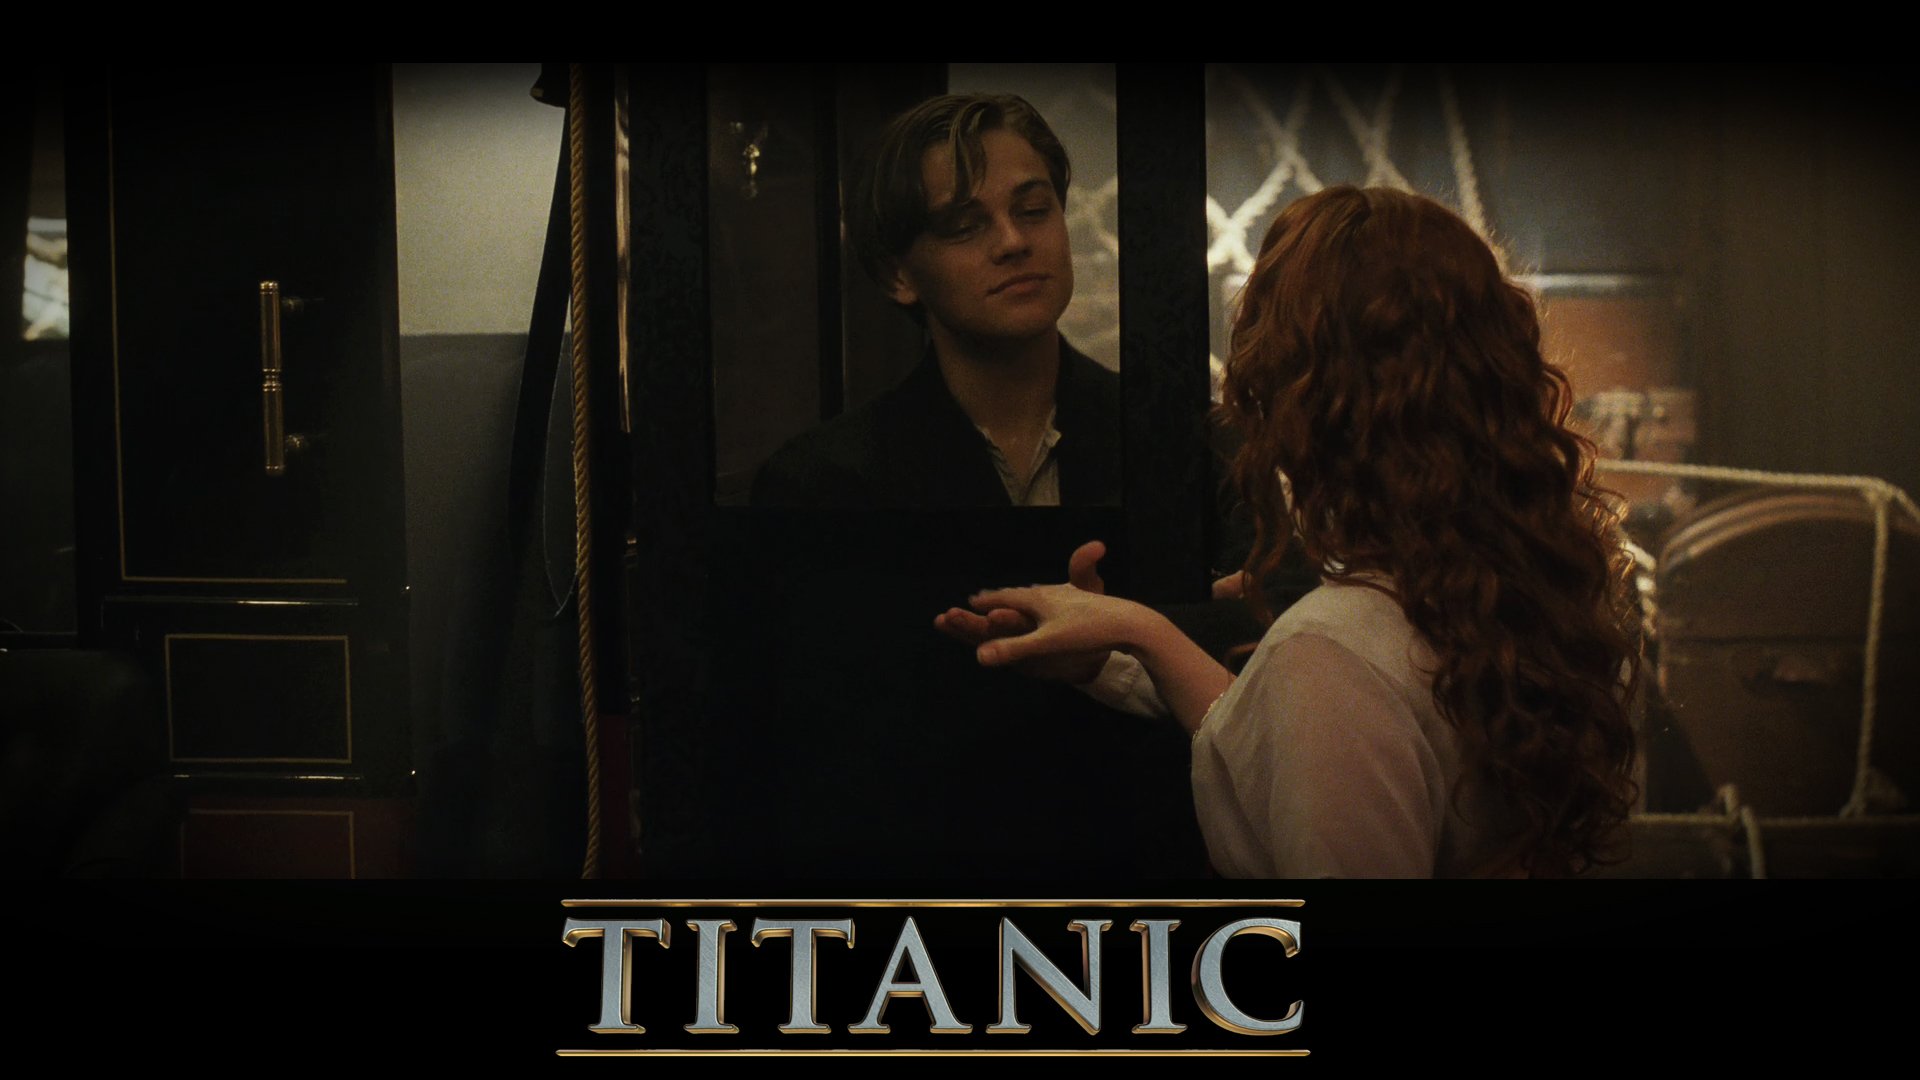 Titanic 3D Wallpapers   coming in April 2012 Movie Wallpapers 1920x1080